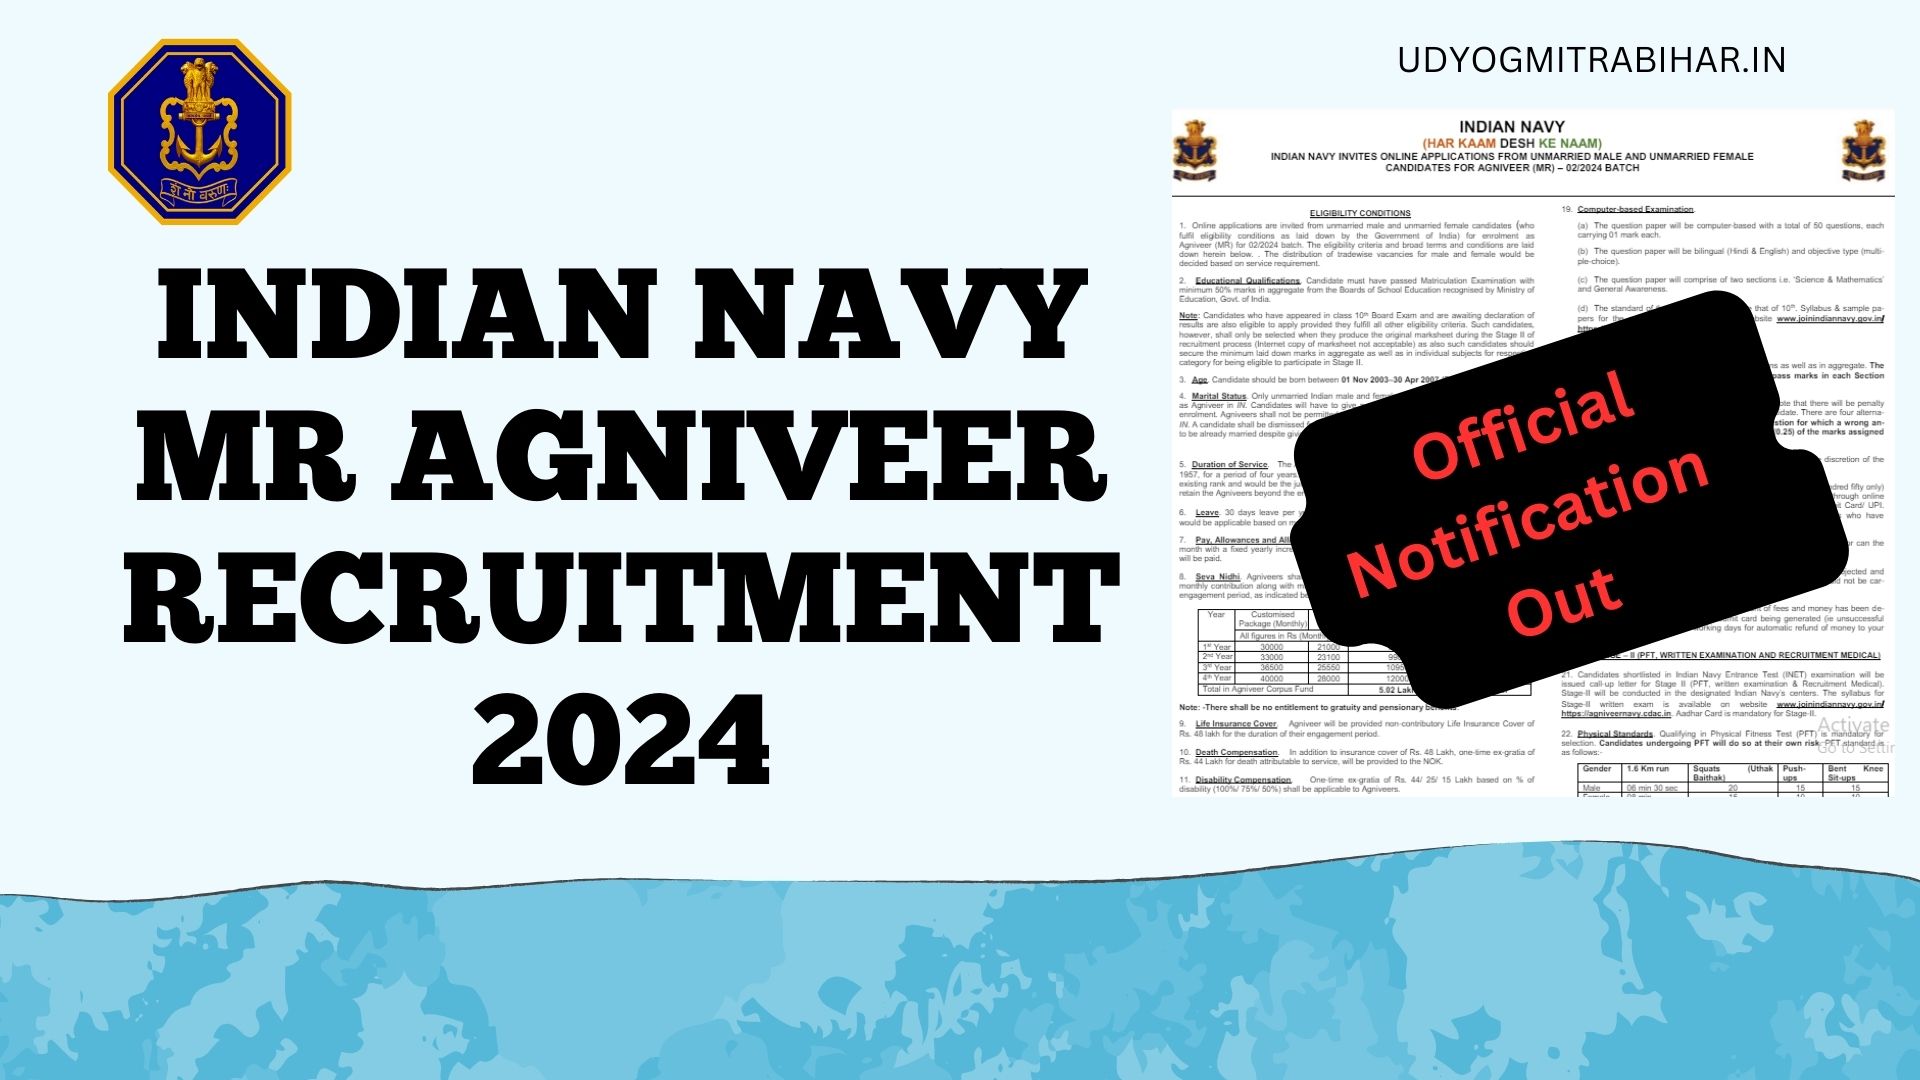 Indian Navy MR Agniveer Recruitment 2024 for Various Positions, Application Process, Syllabus, Last Date